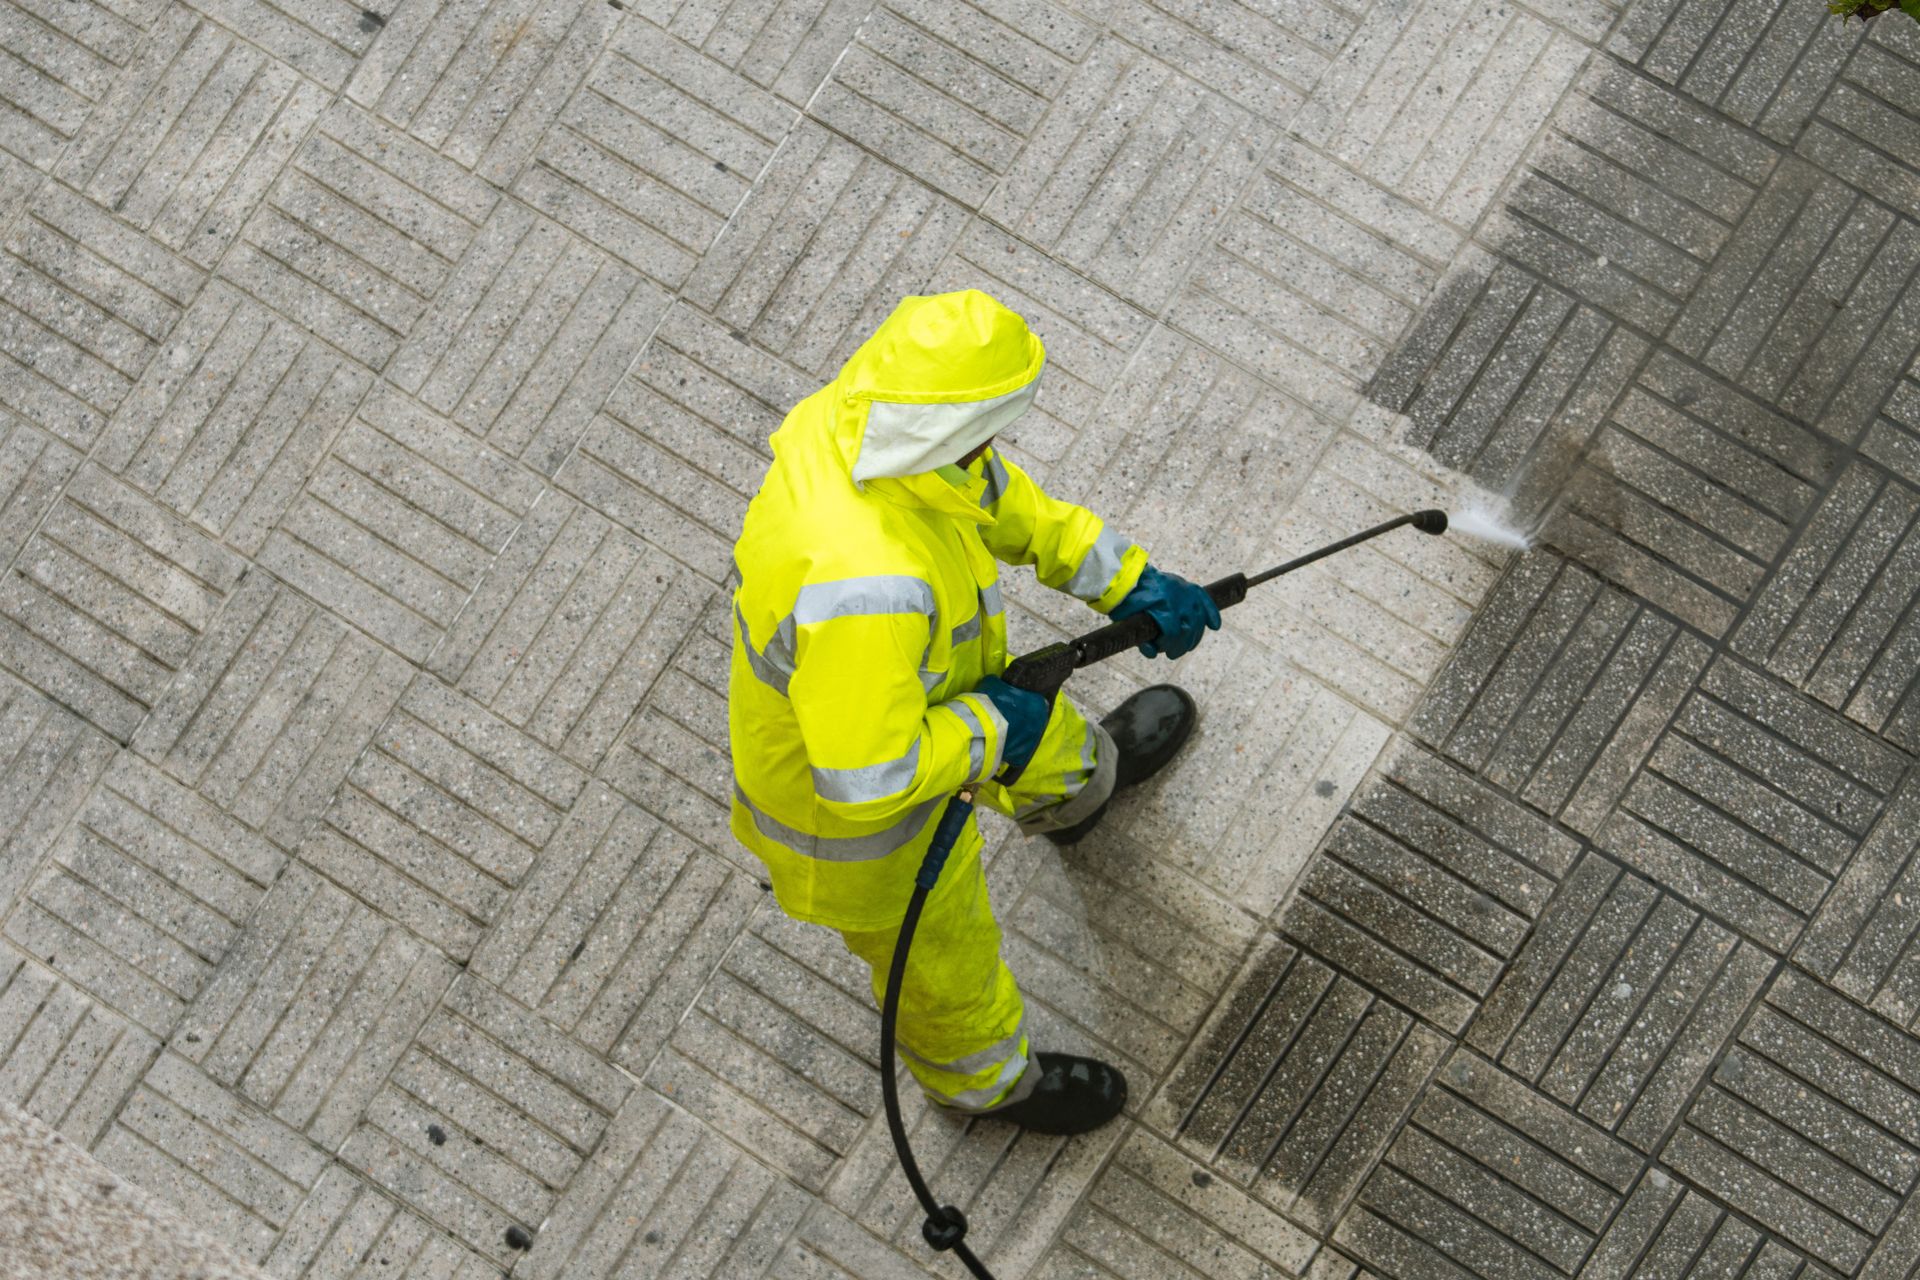 a man in a yellow suit is spraying a hose on a sidewalk .